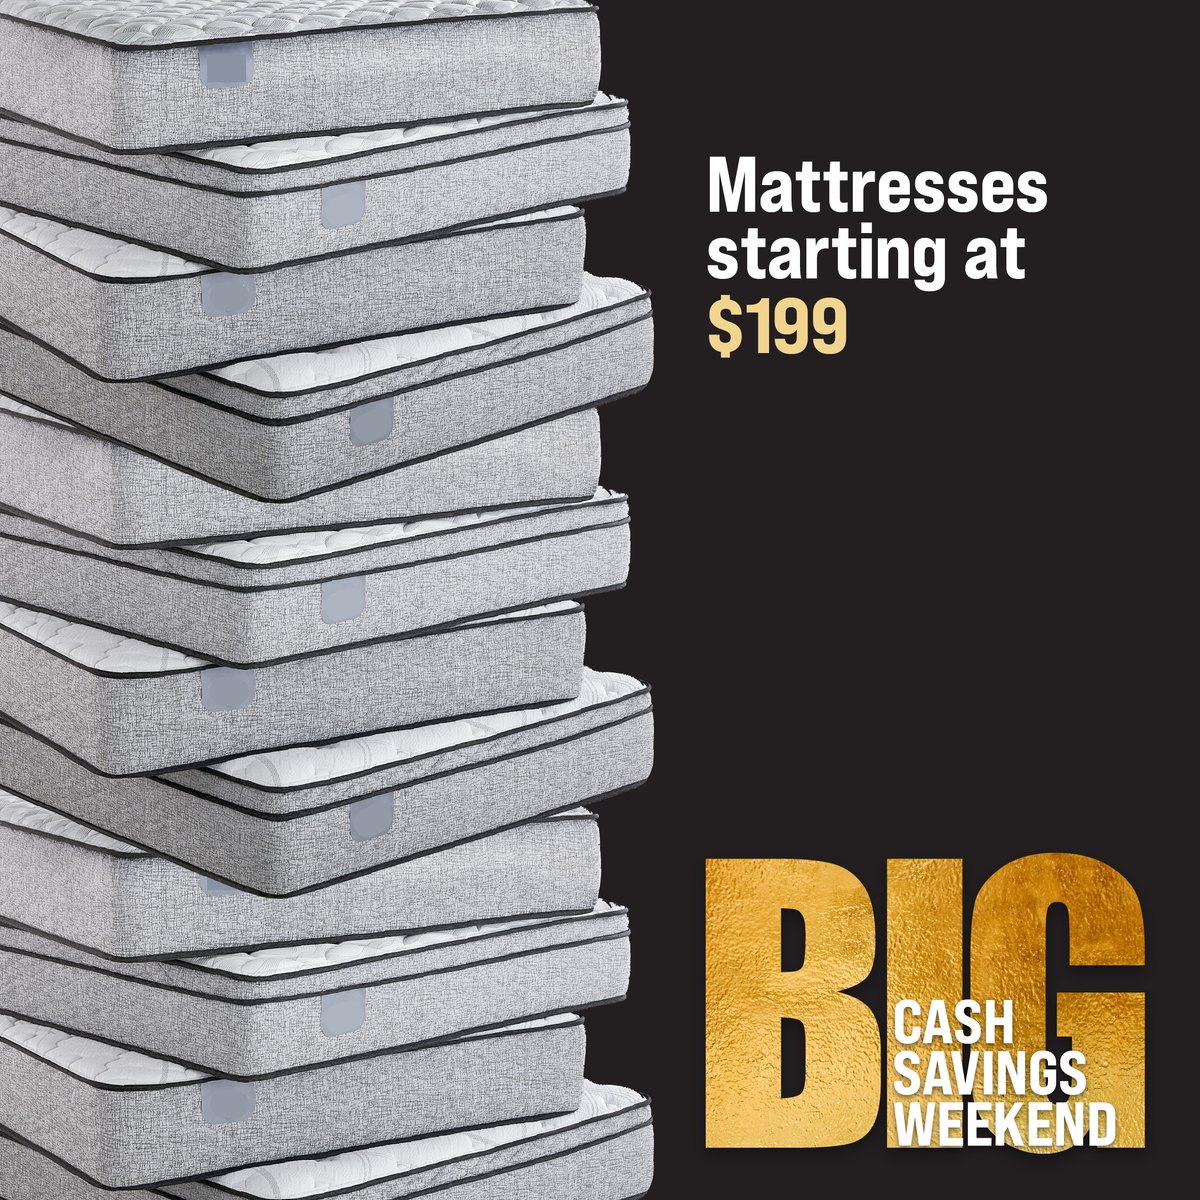 During our BIG Cash Savings Weekend:
Clearance King mattresses are: $999
Clearance Queens: $799

20% off Warehouse mattress stock
50% off floor models.

You don't want to miss this! This weekend only May 3 - 5.

#klosstohome #mattresssale #localbusiness